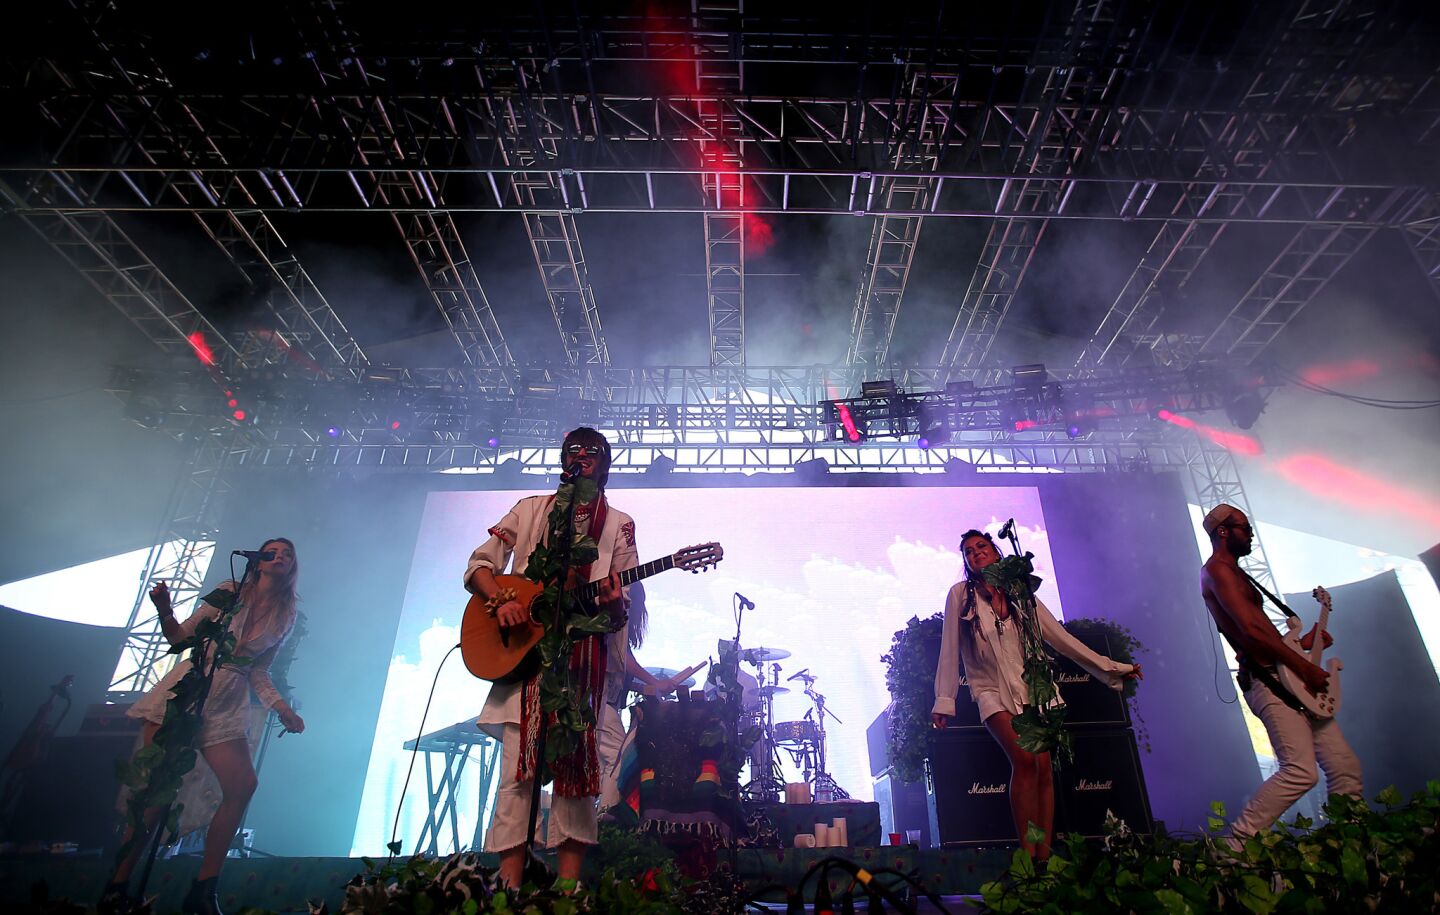 Crystal Fighters, an English electronic folk band, perform.